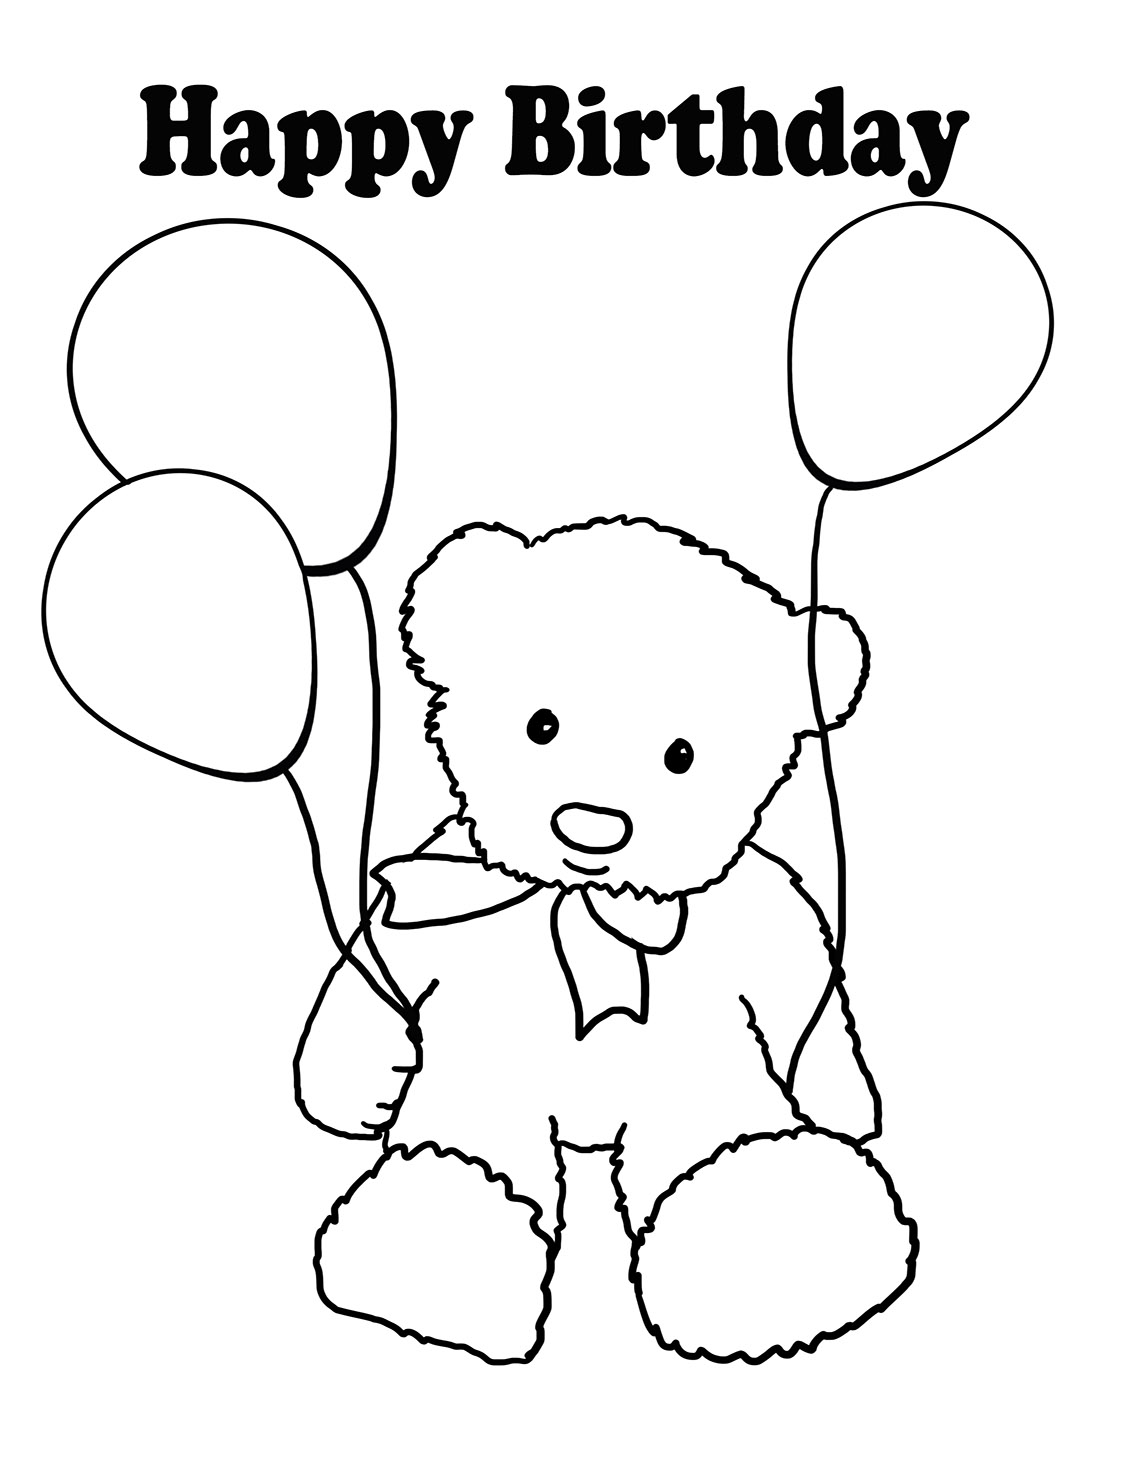 Balloon Coloring Pages - Best Coloring Pages For Kids